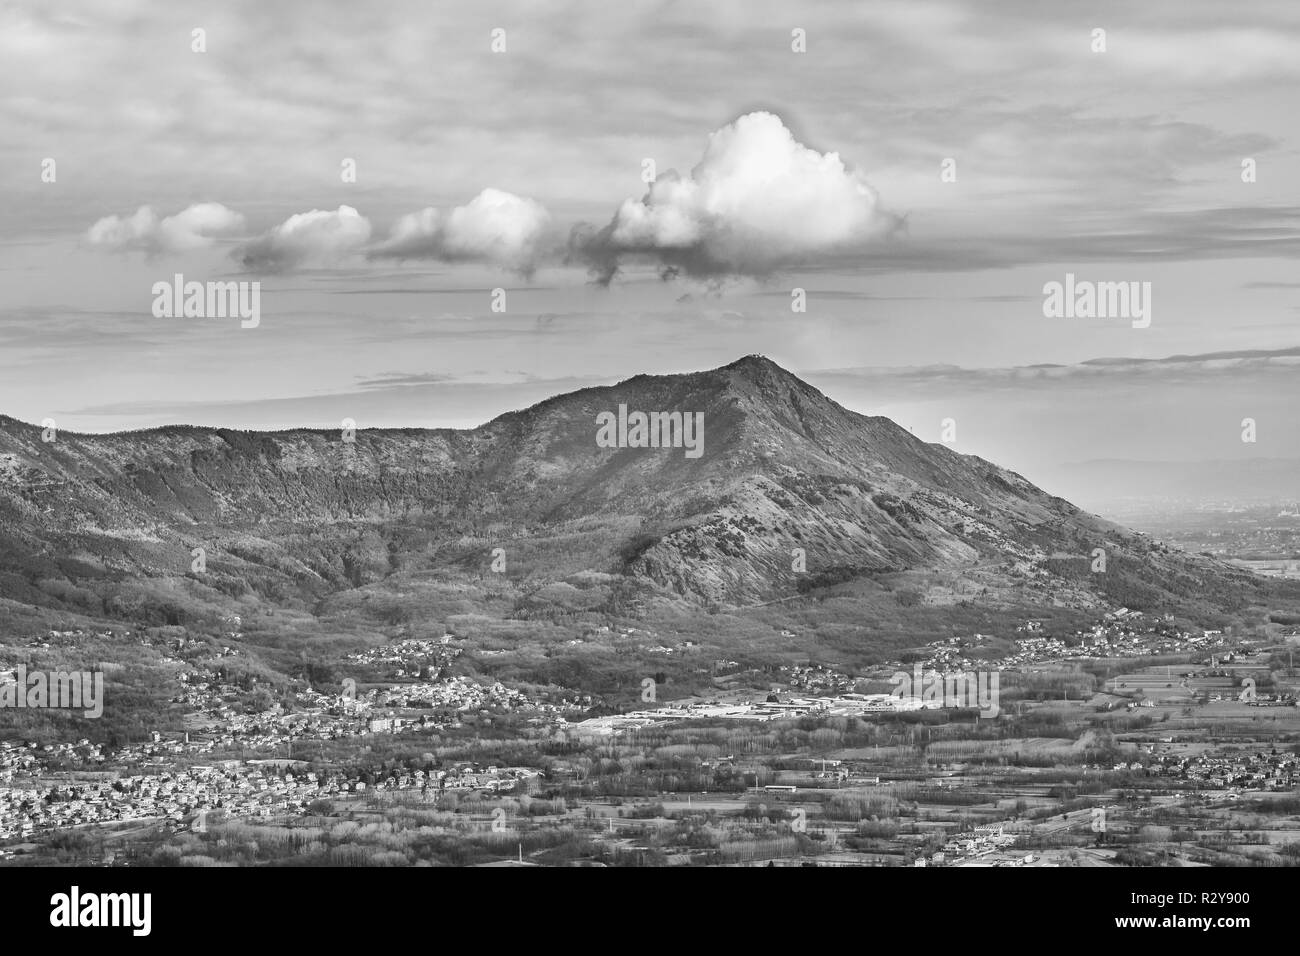 Alpes mountains aerial view from sacra san michele abbey at piamonte district, Italy Stock Photo